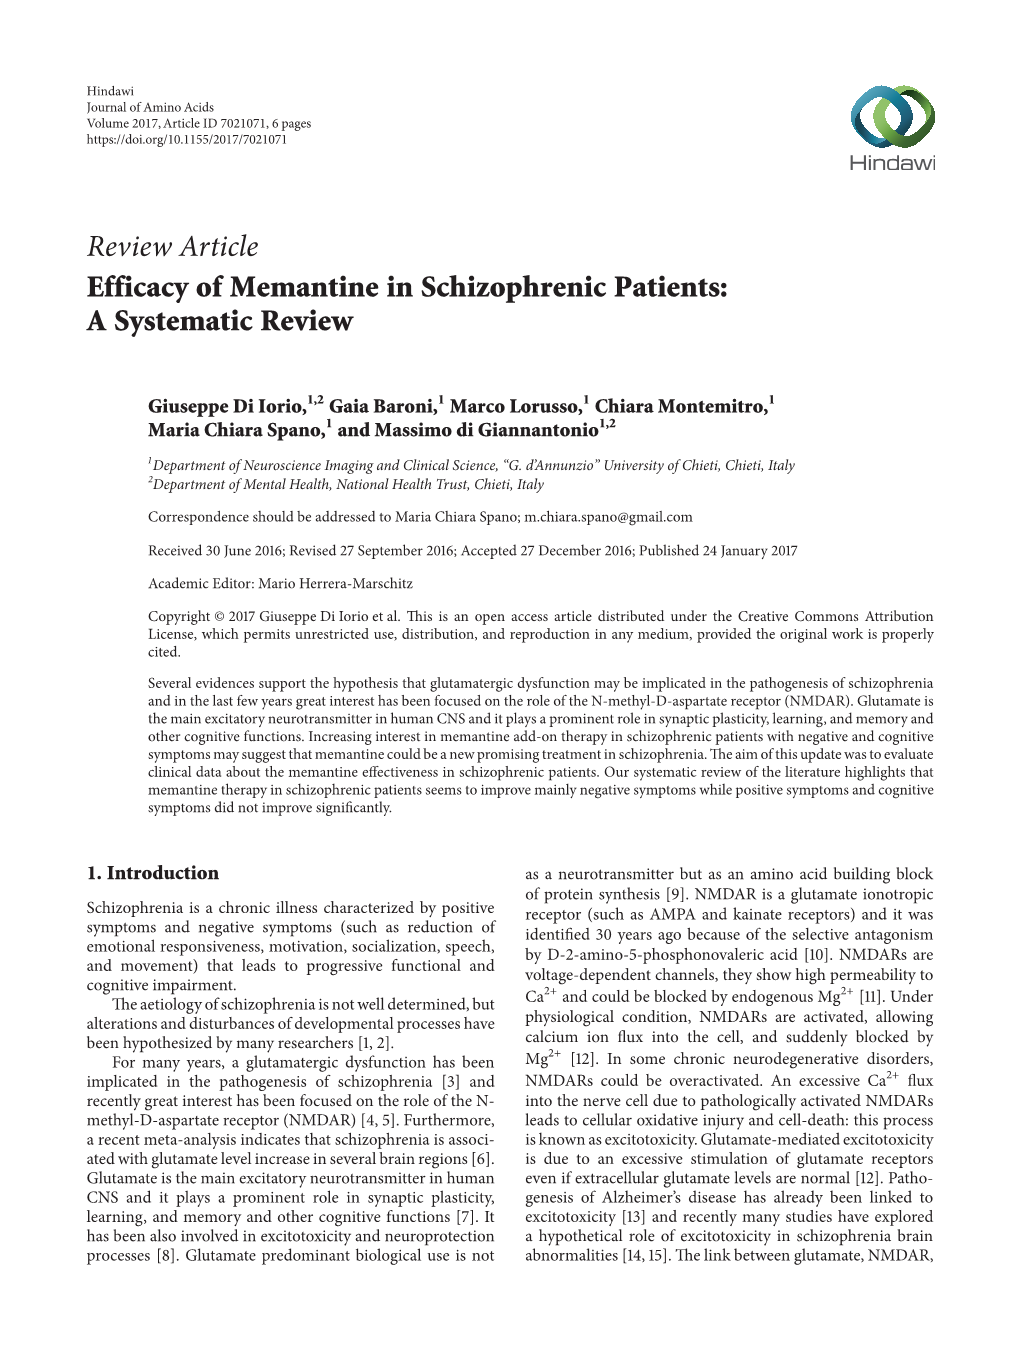 Review Article Efficacy of Memantine in Schizophrenic Patients: a Systematic Review